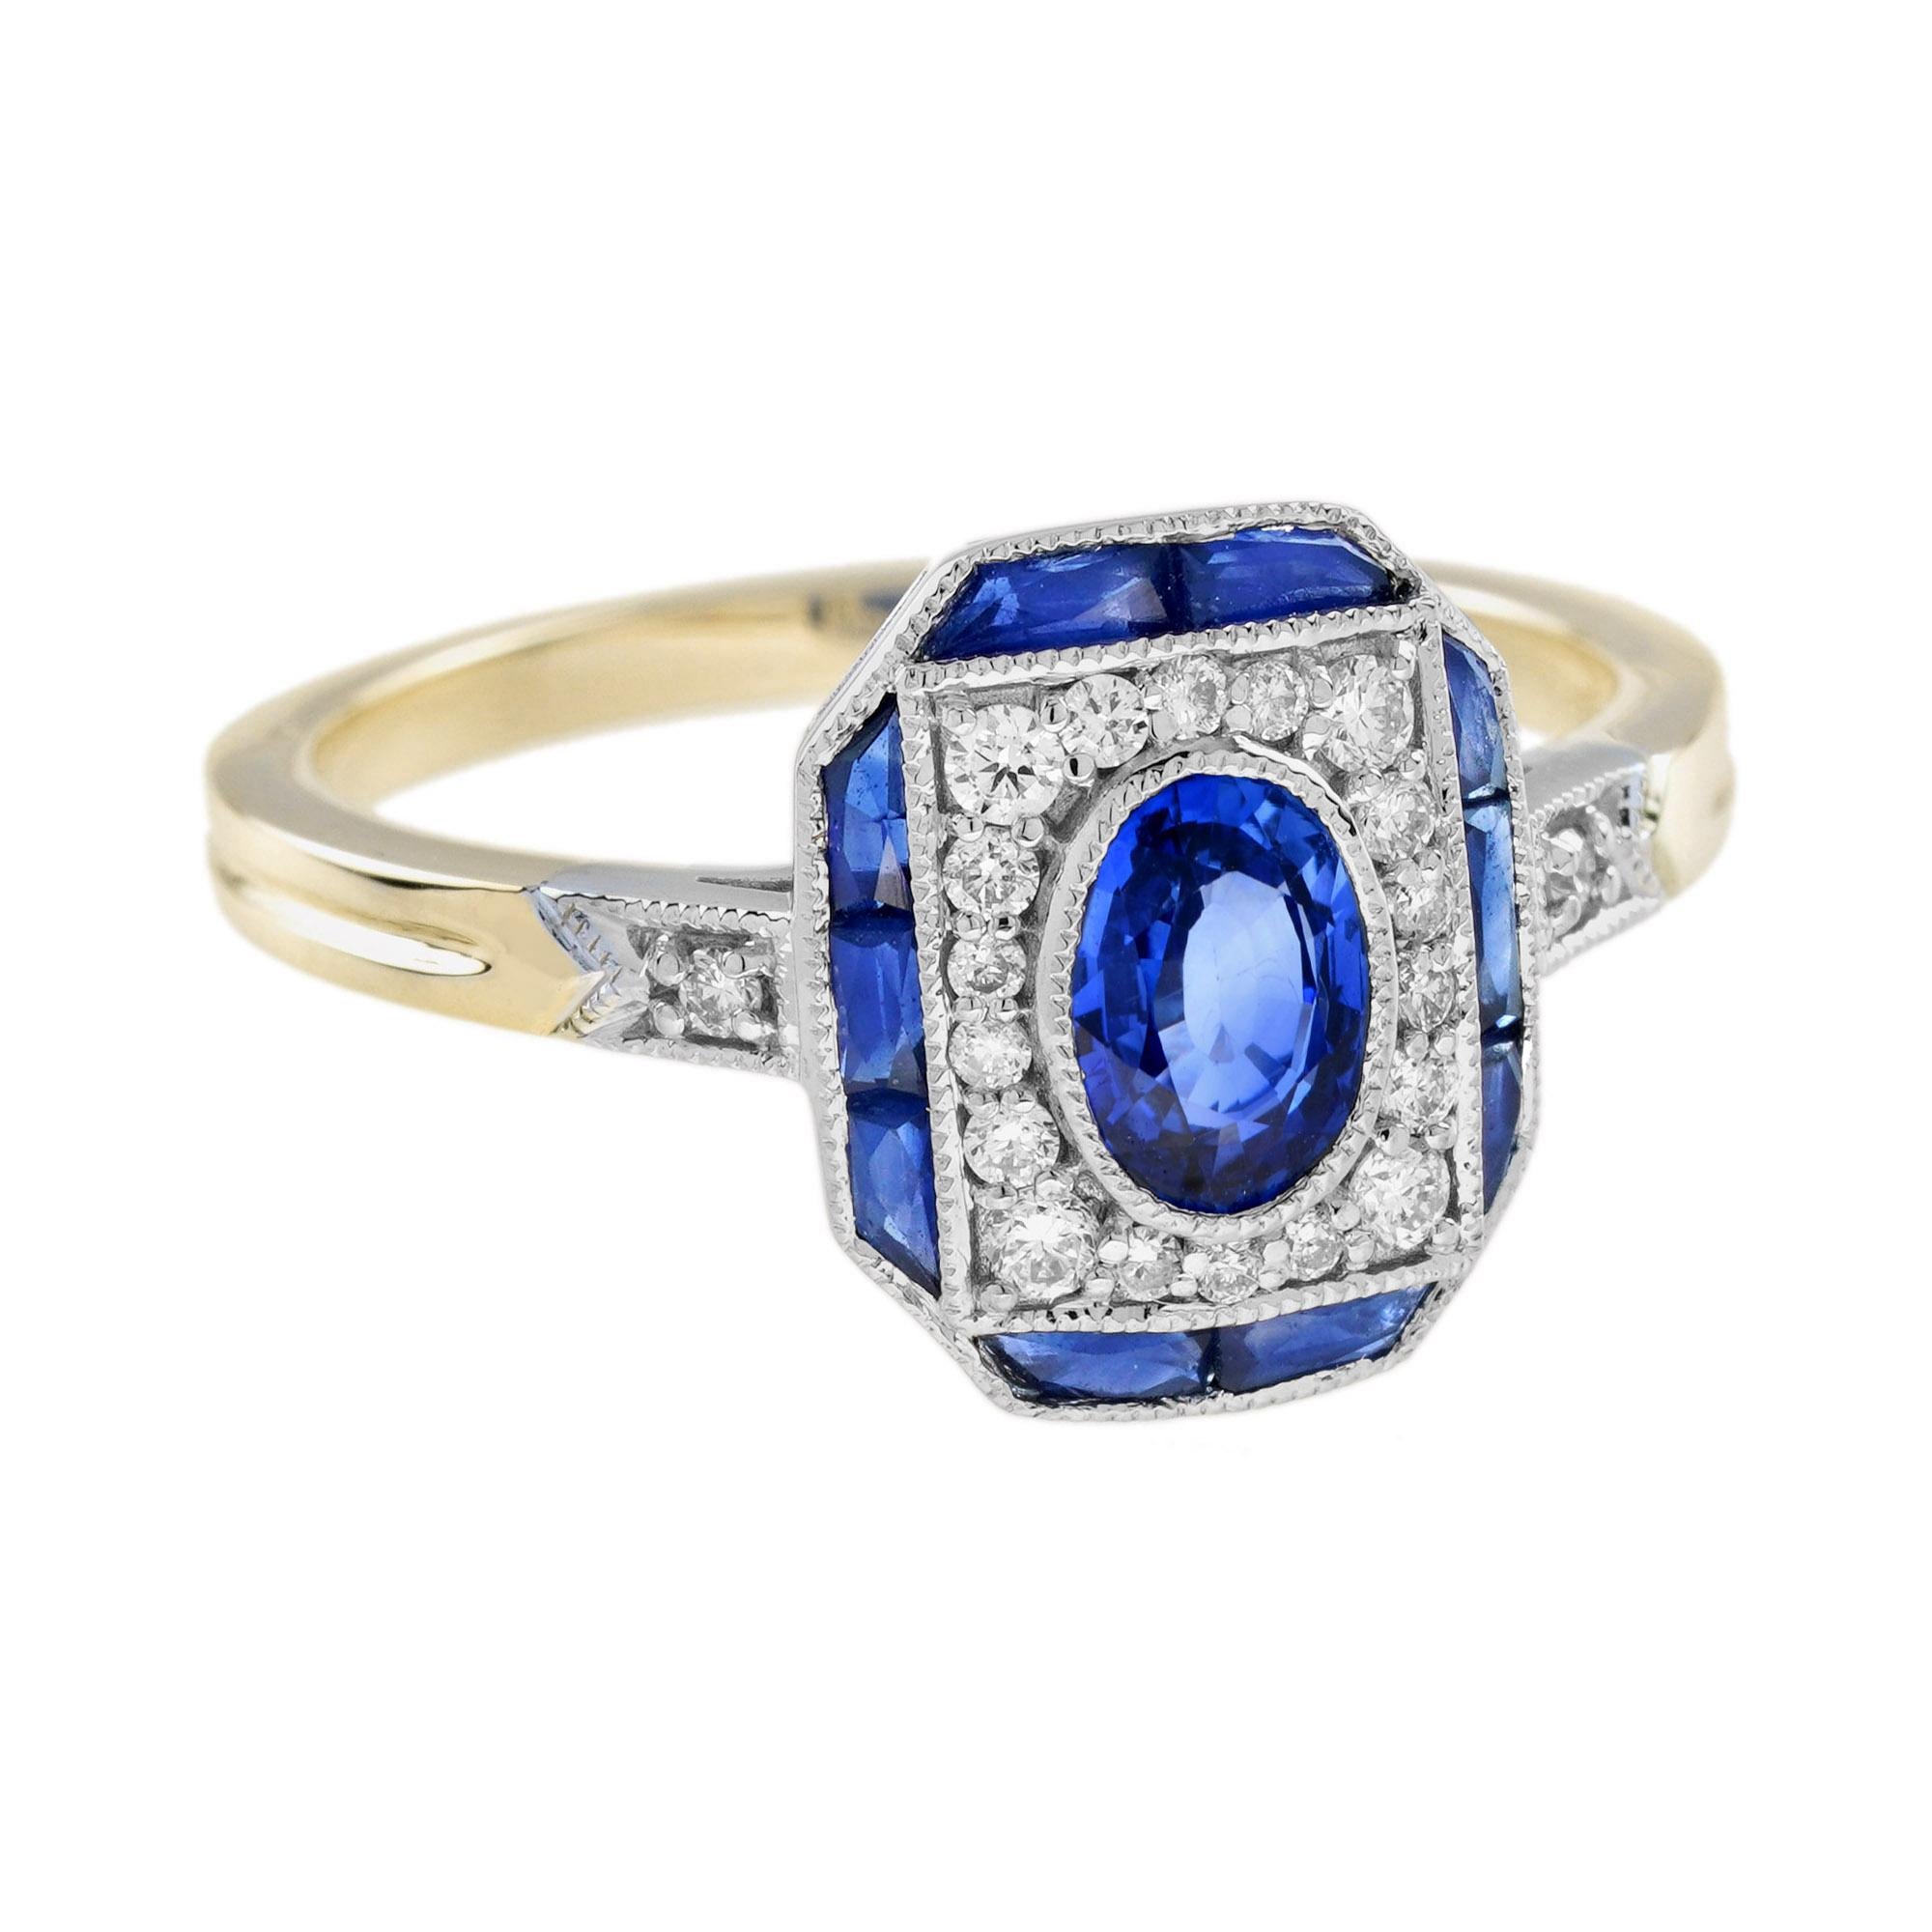 Oval Cut Ceylon Sapphire Diamond Art Deco Style Engagement Ring in 18K Yellow Gold For Sale